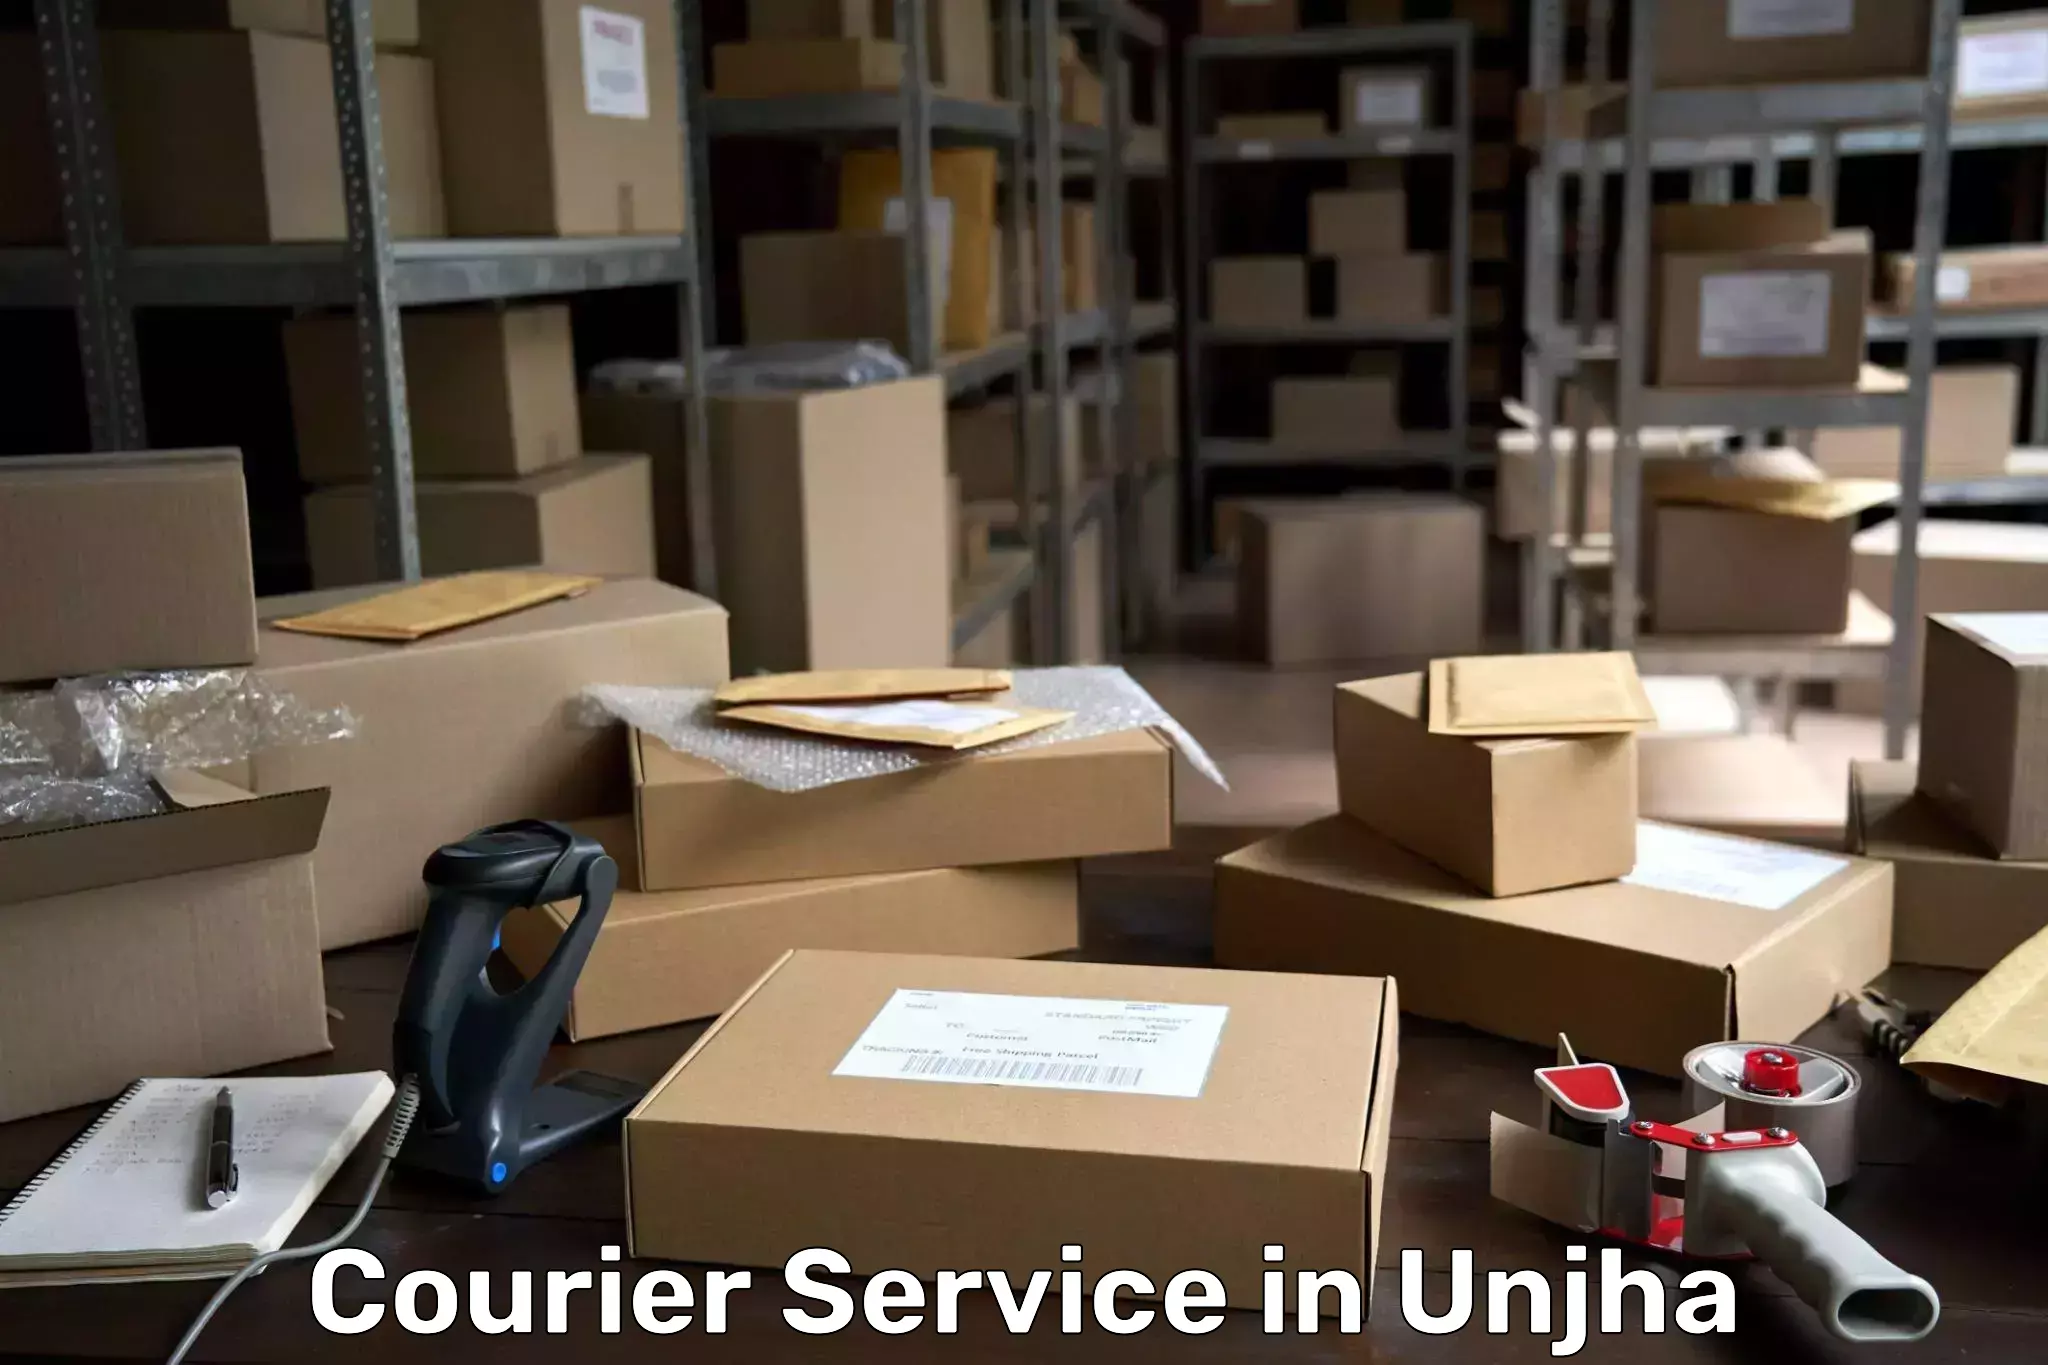 Tailored delivery services in Unjha